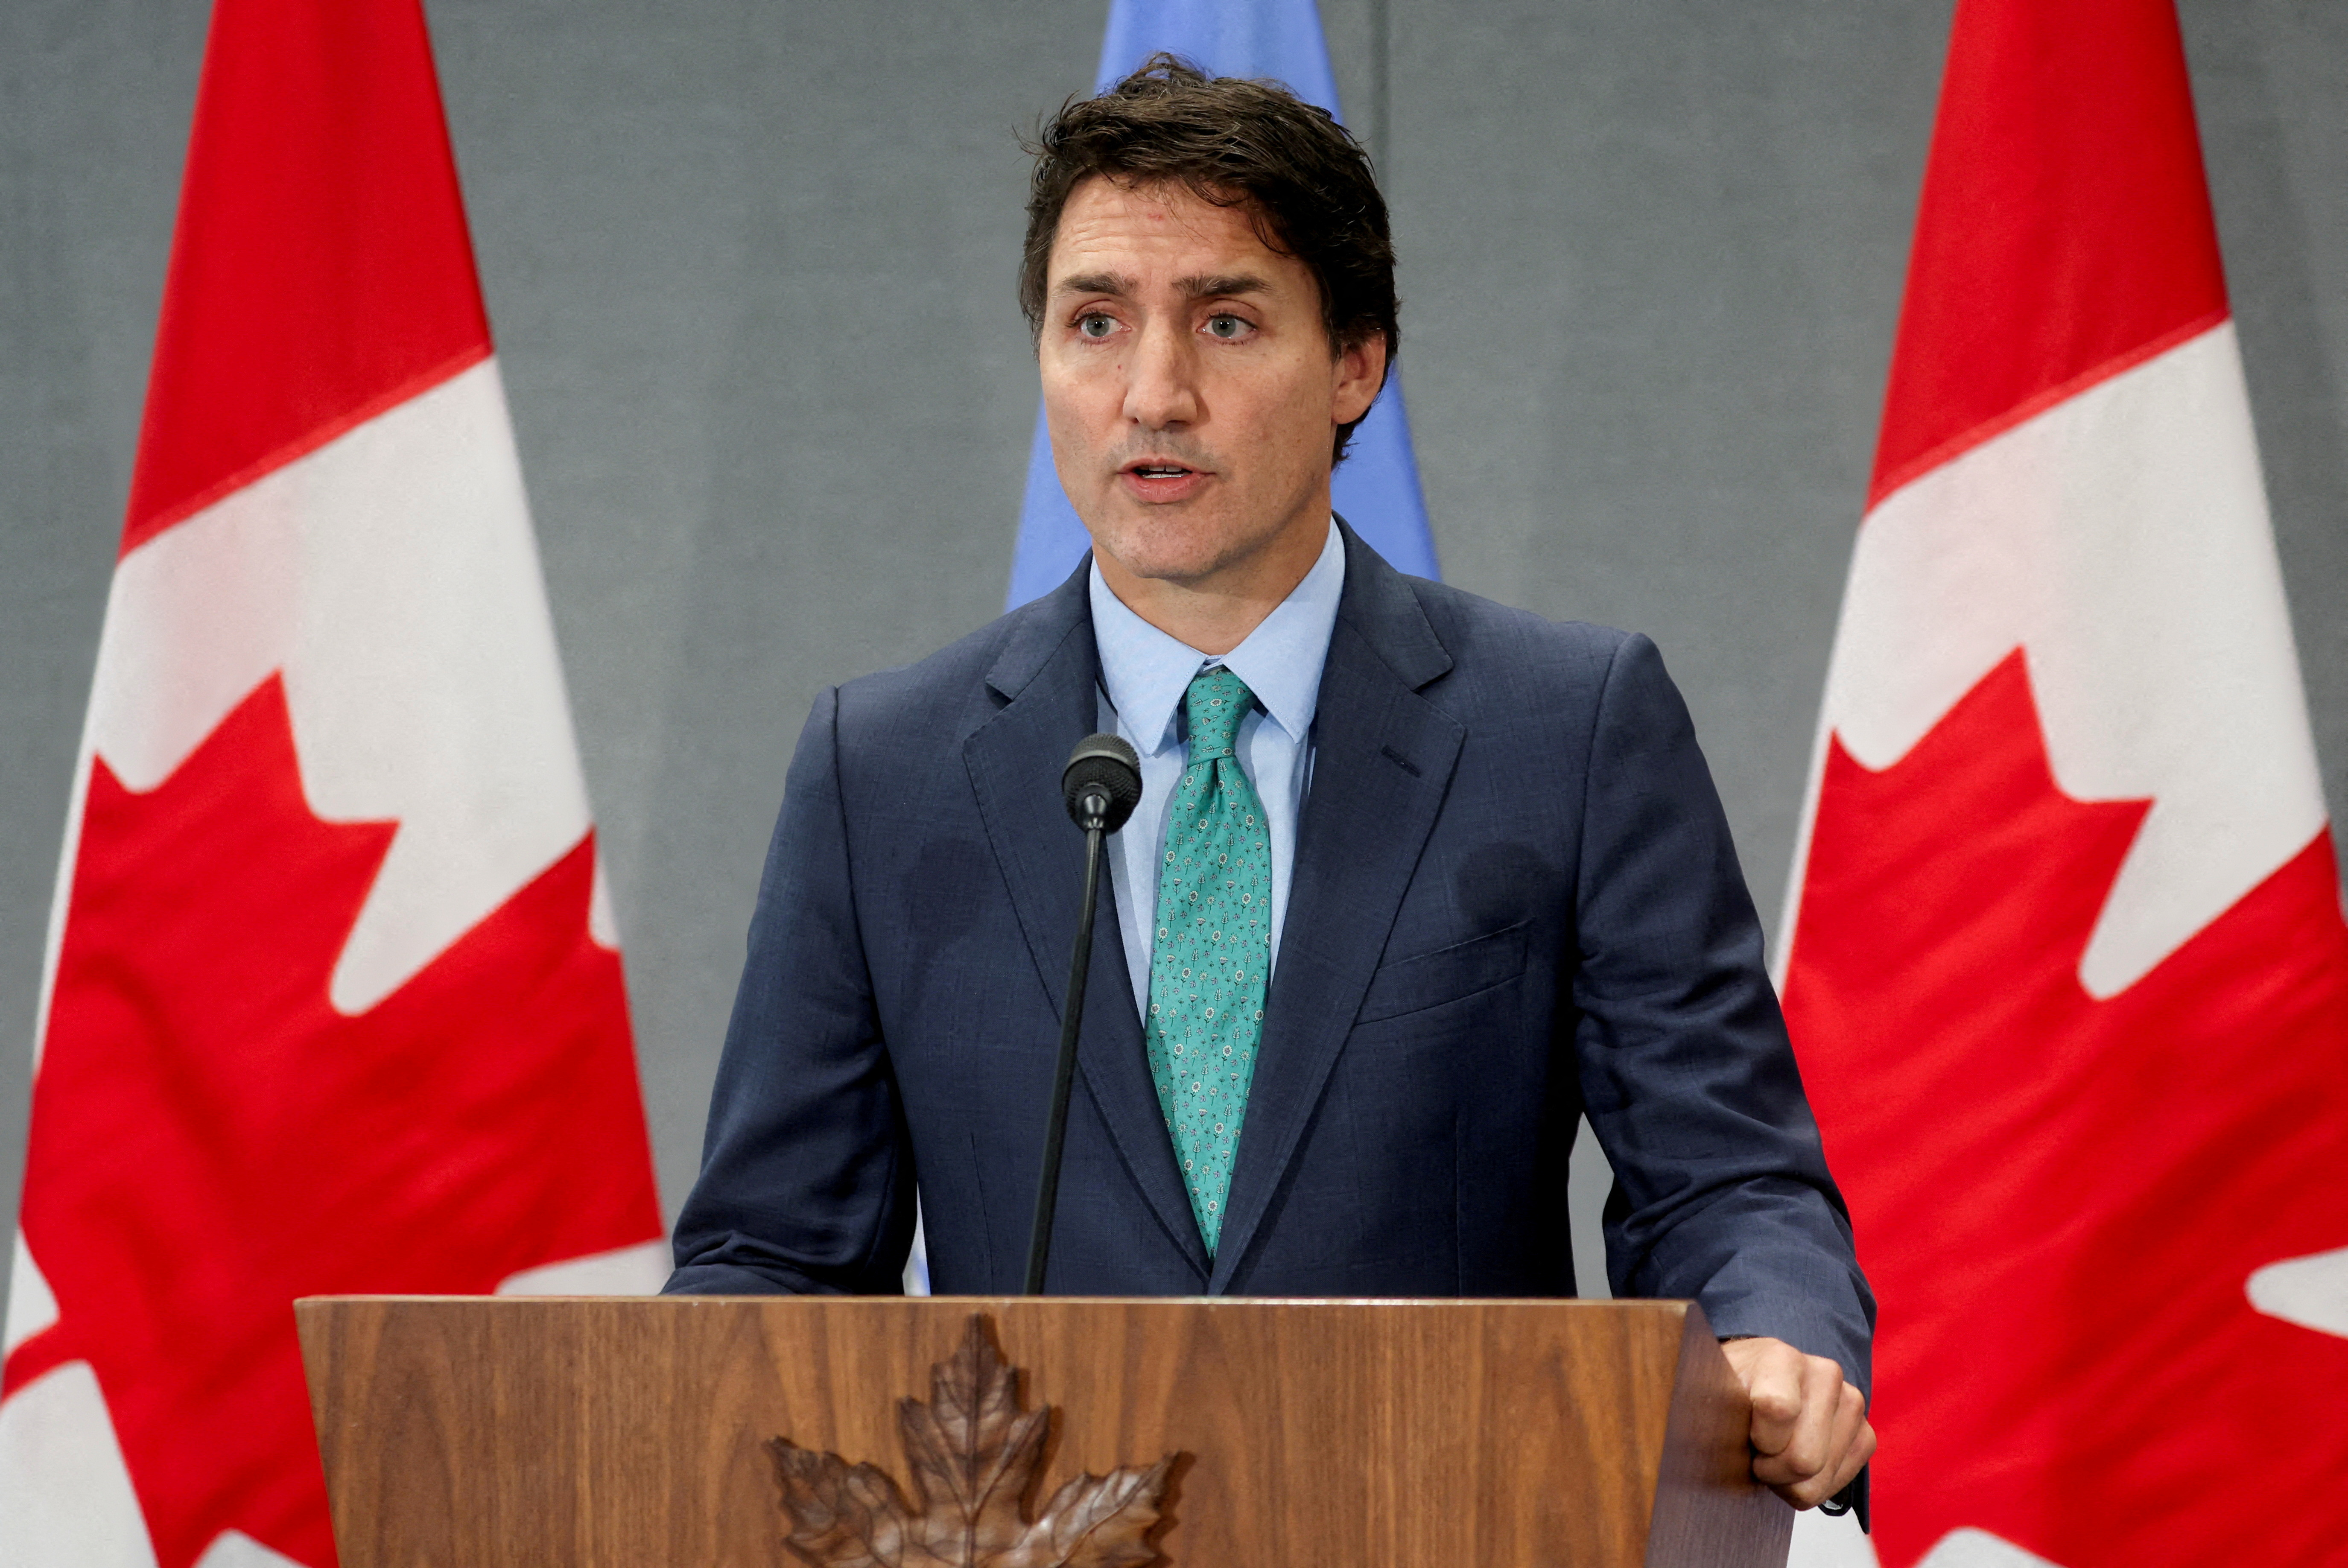 Canadian Prime Minister Justin Trudeau speaks during a press conference on the sidelines of the UNGA, in New York